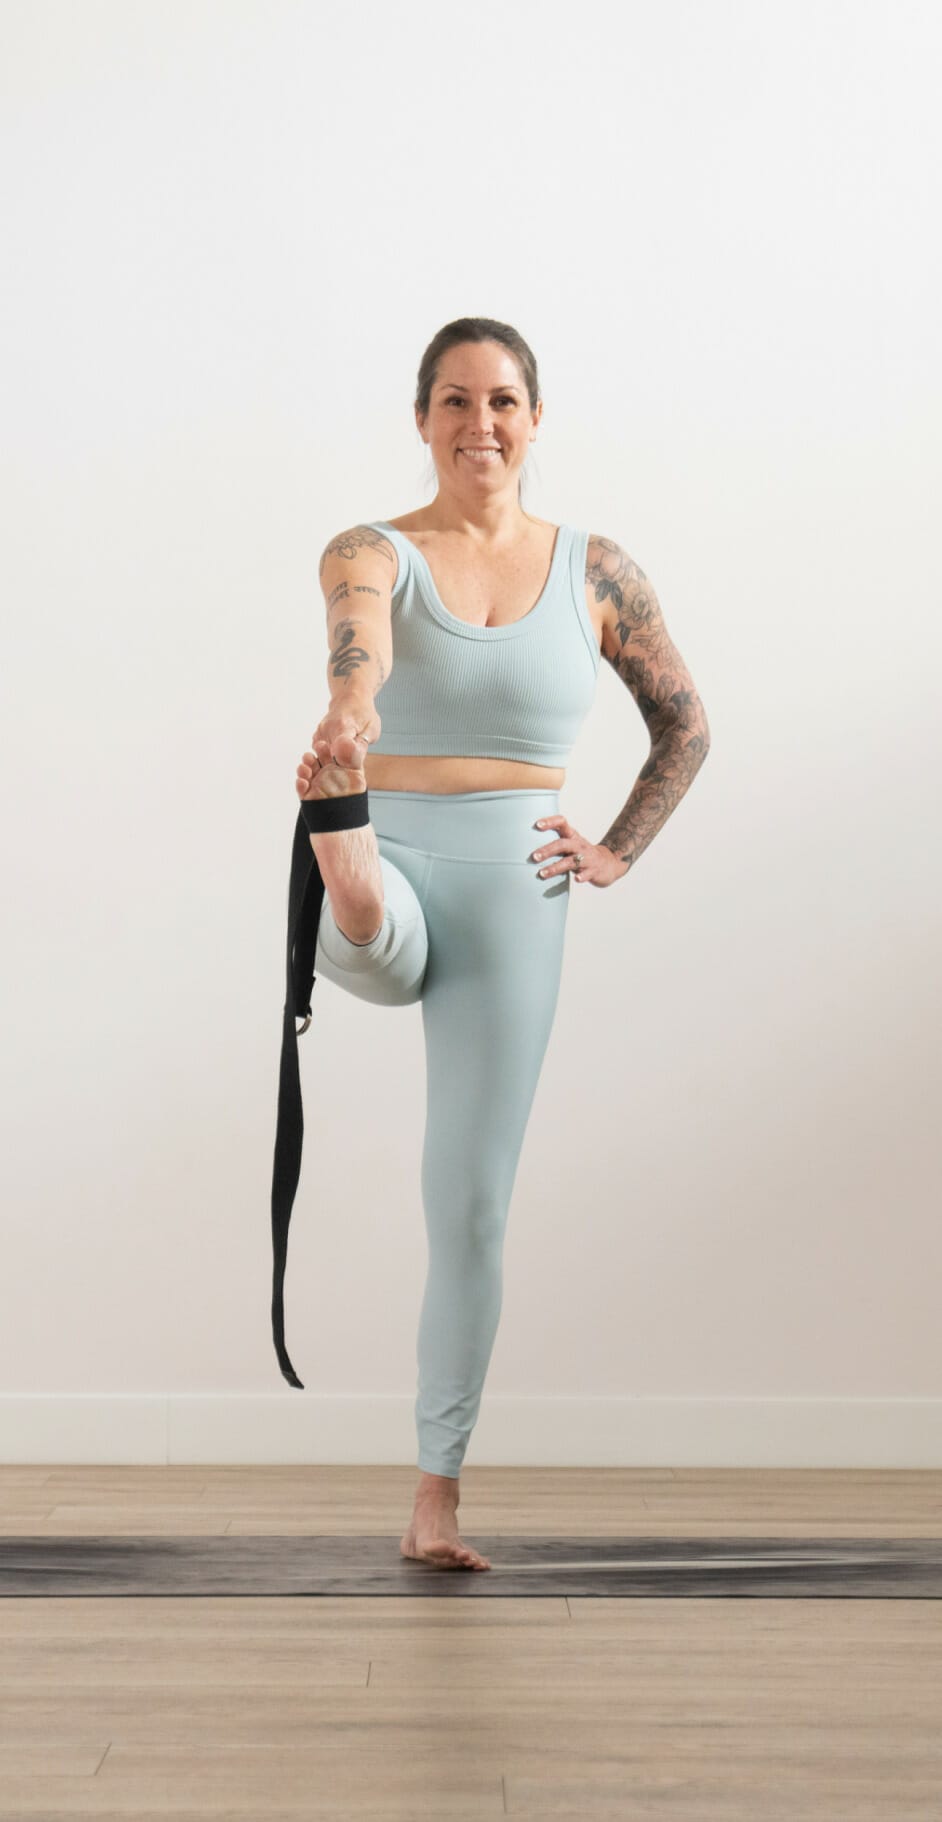 A photo of Michelle, standing on a yoga mat with her left leg held straight out in front of her. She is using a band to hold her foot, and is smiling with her left hand on her hip.